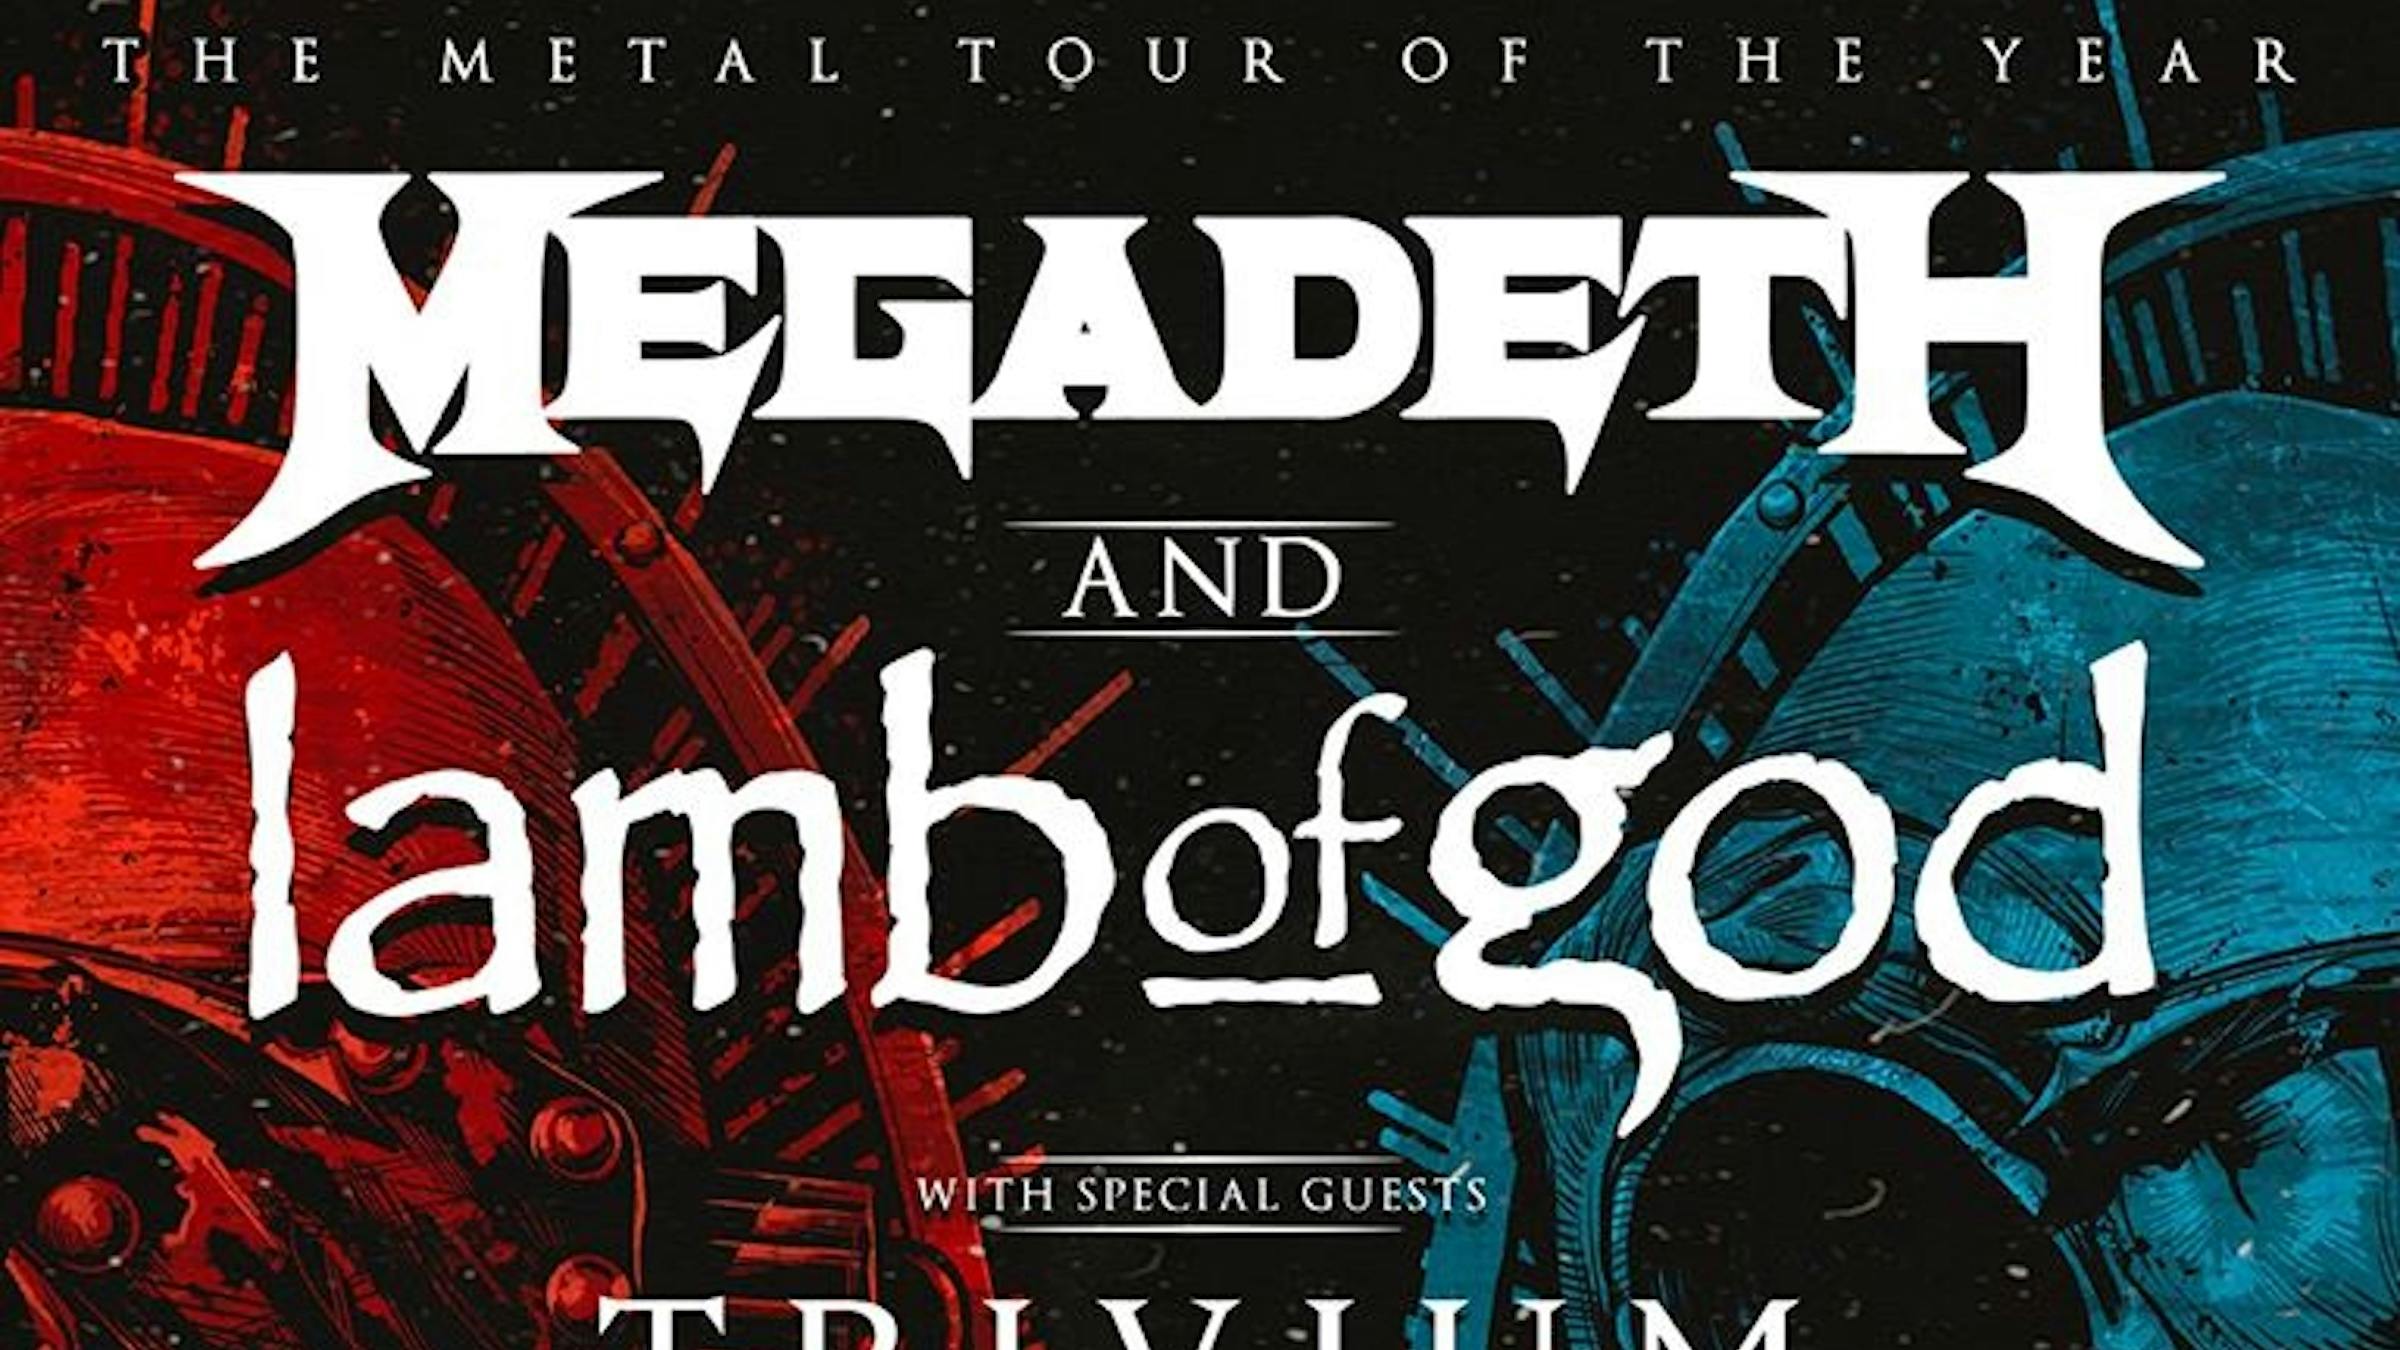 Megadeth, Lamb Of God, Trivium And In Flames' Metal Tour Of The Year Rescheduled To 2021